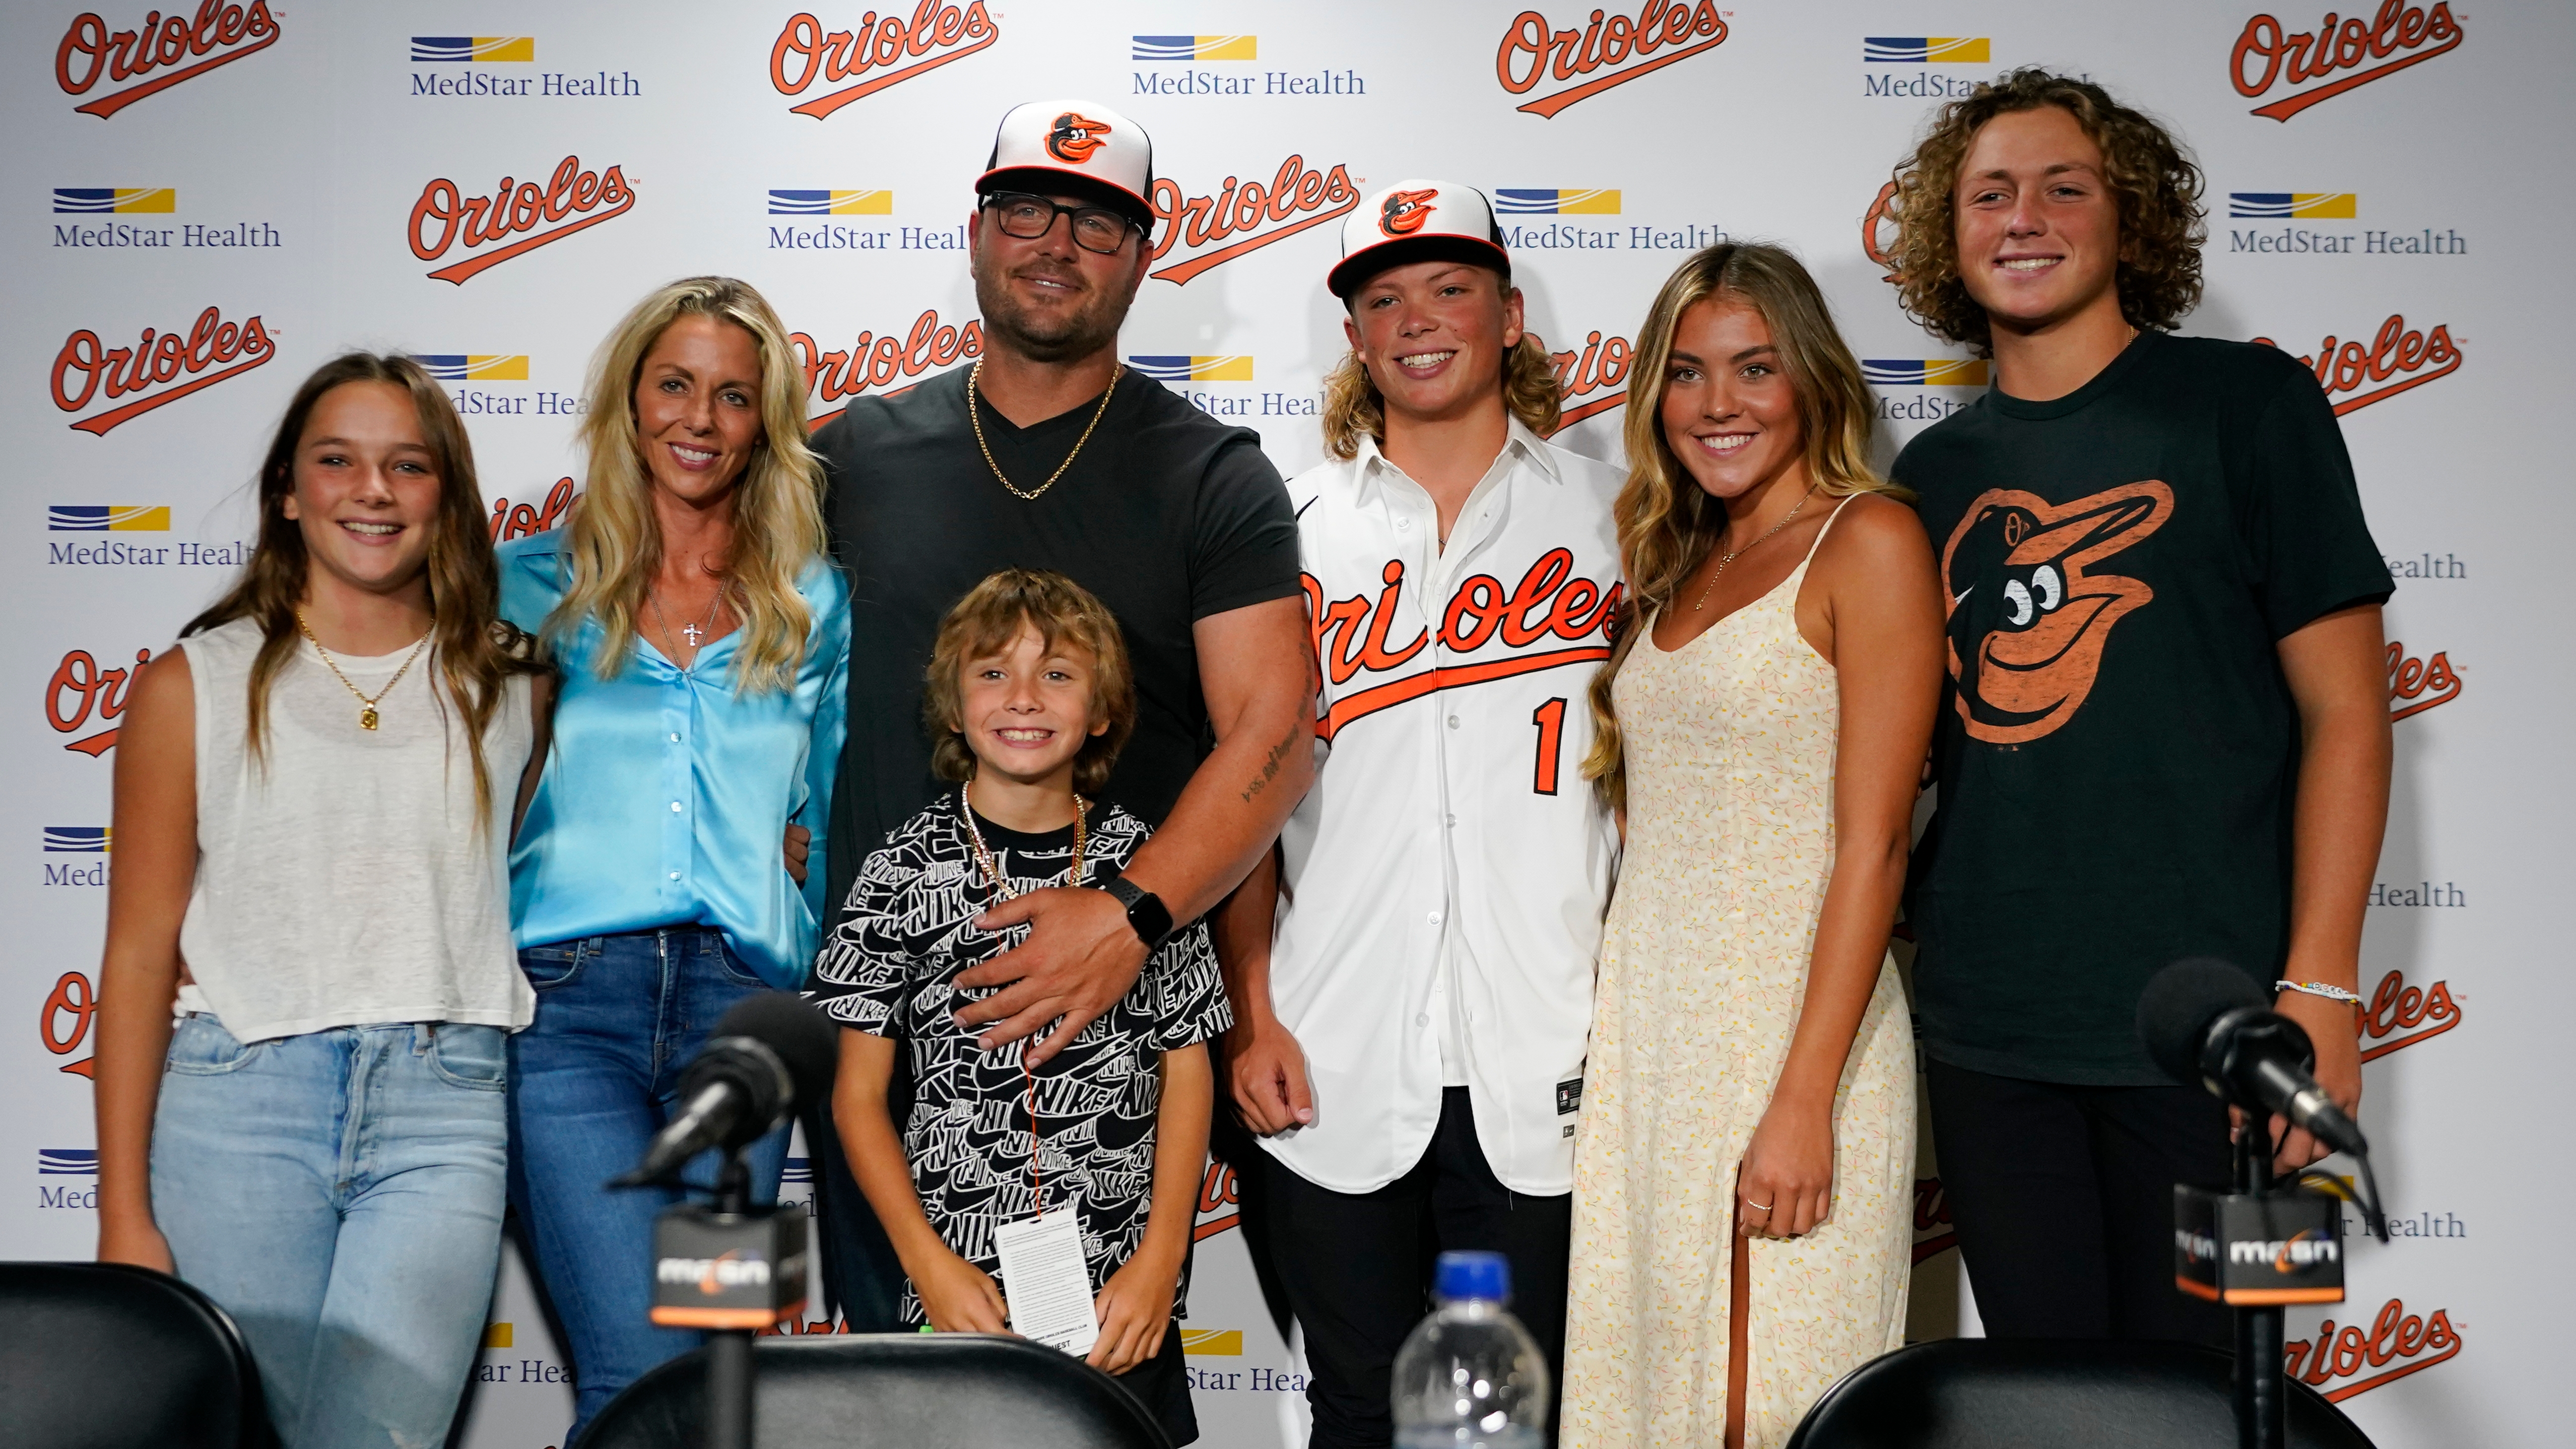 Jackson Holliday's family takes in firsthand view of Orioles' top